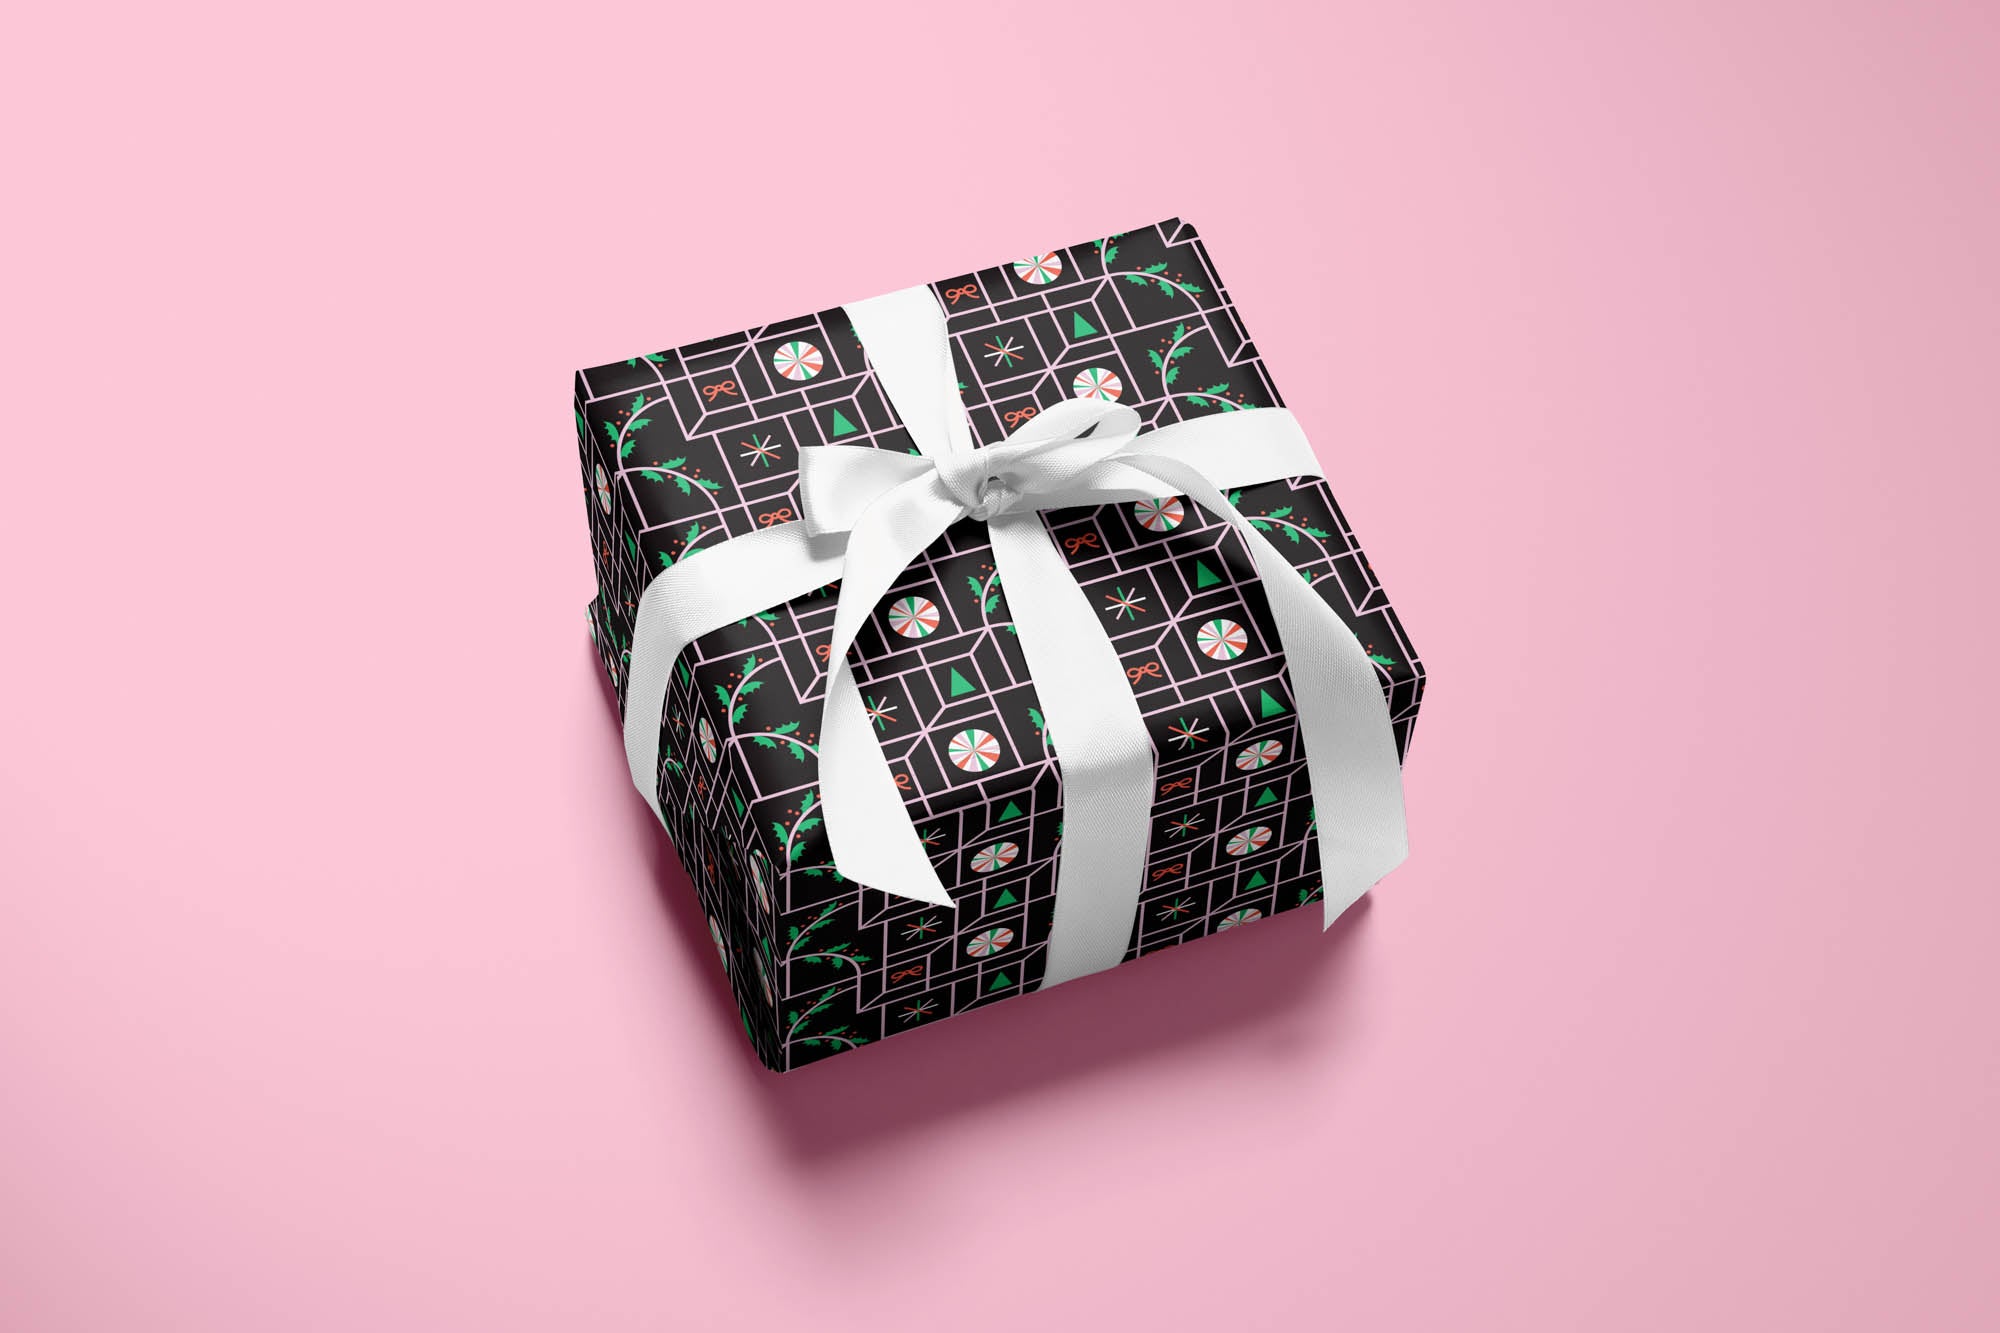 Mid-century and op art inspired optical illusion wrapping paper with pattern of peppermints, holly, bows, Christmas trees, and twinkly stars. Colorful, modern, holiday gift wrap with fun prints and patterns by @mydarlin_bk. Made in USA.